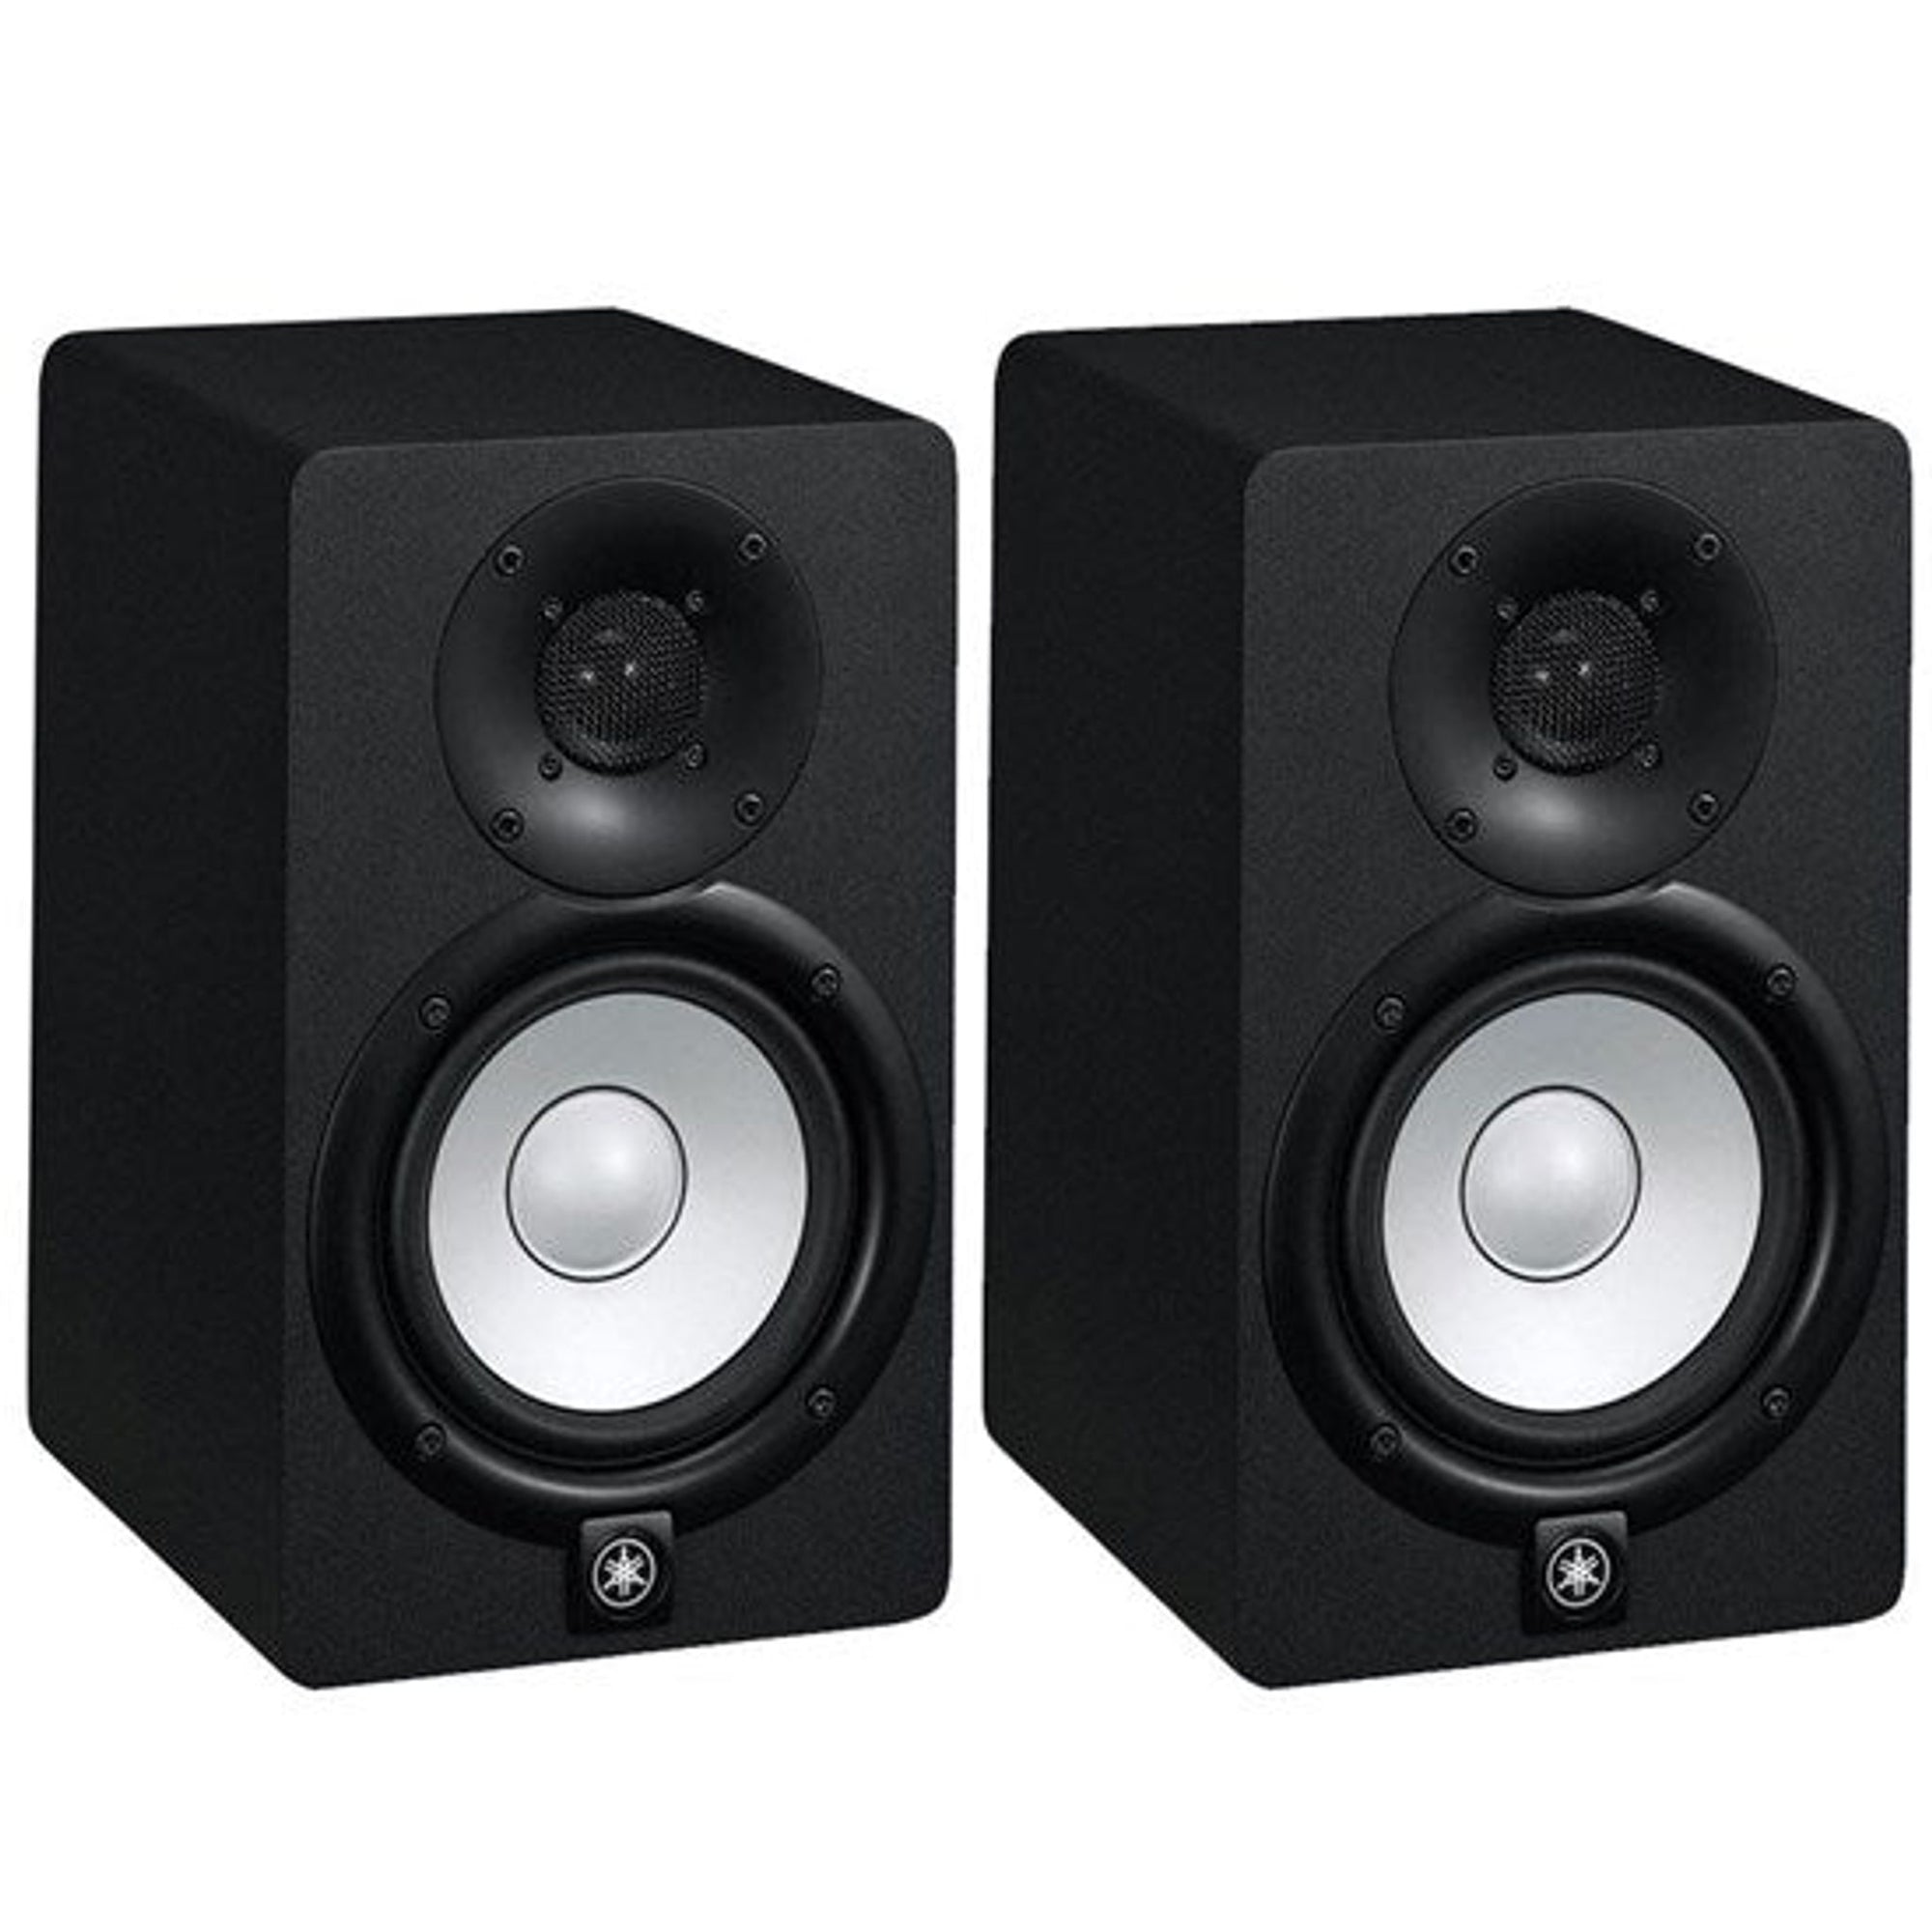 The Yamaha HS5 Active Nearfield Studio Monitors maintain the iconic white woofer and signature sound of Yamaha's nearfield reference monitors have been the industry standard since their introduction in the 1970s for one reason: accuracy.